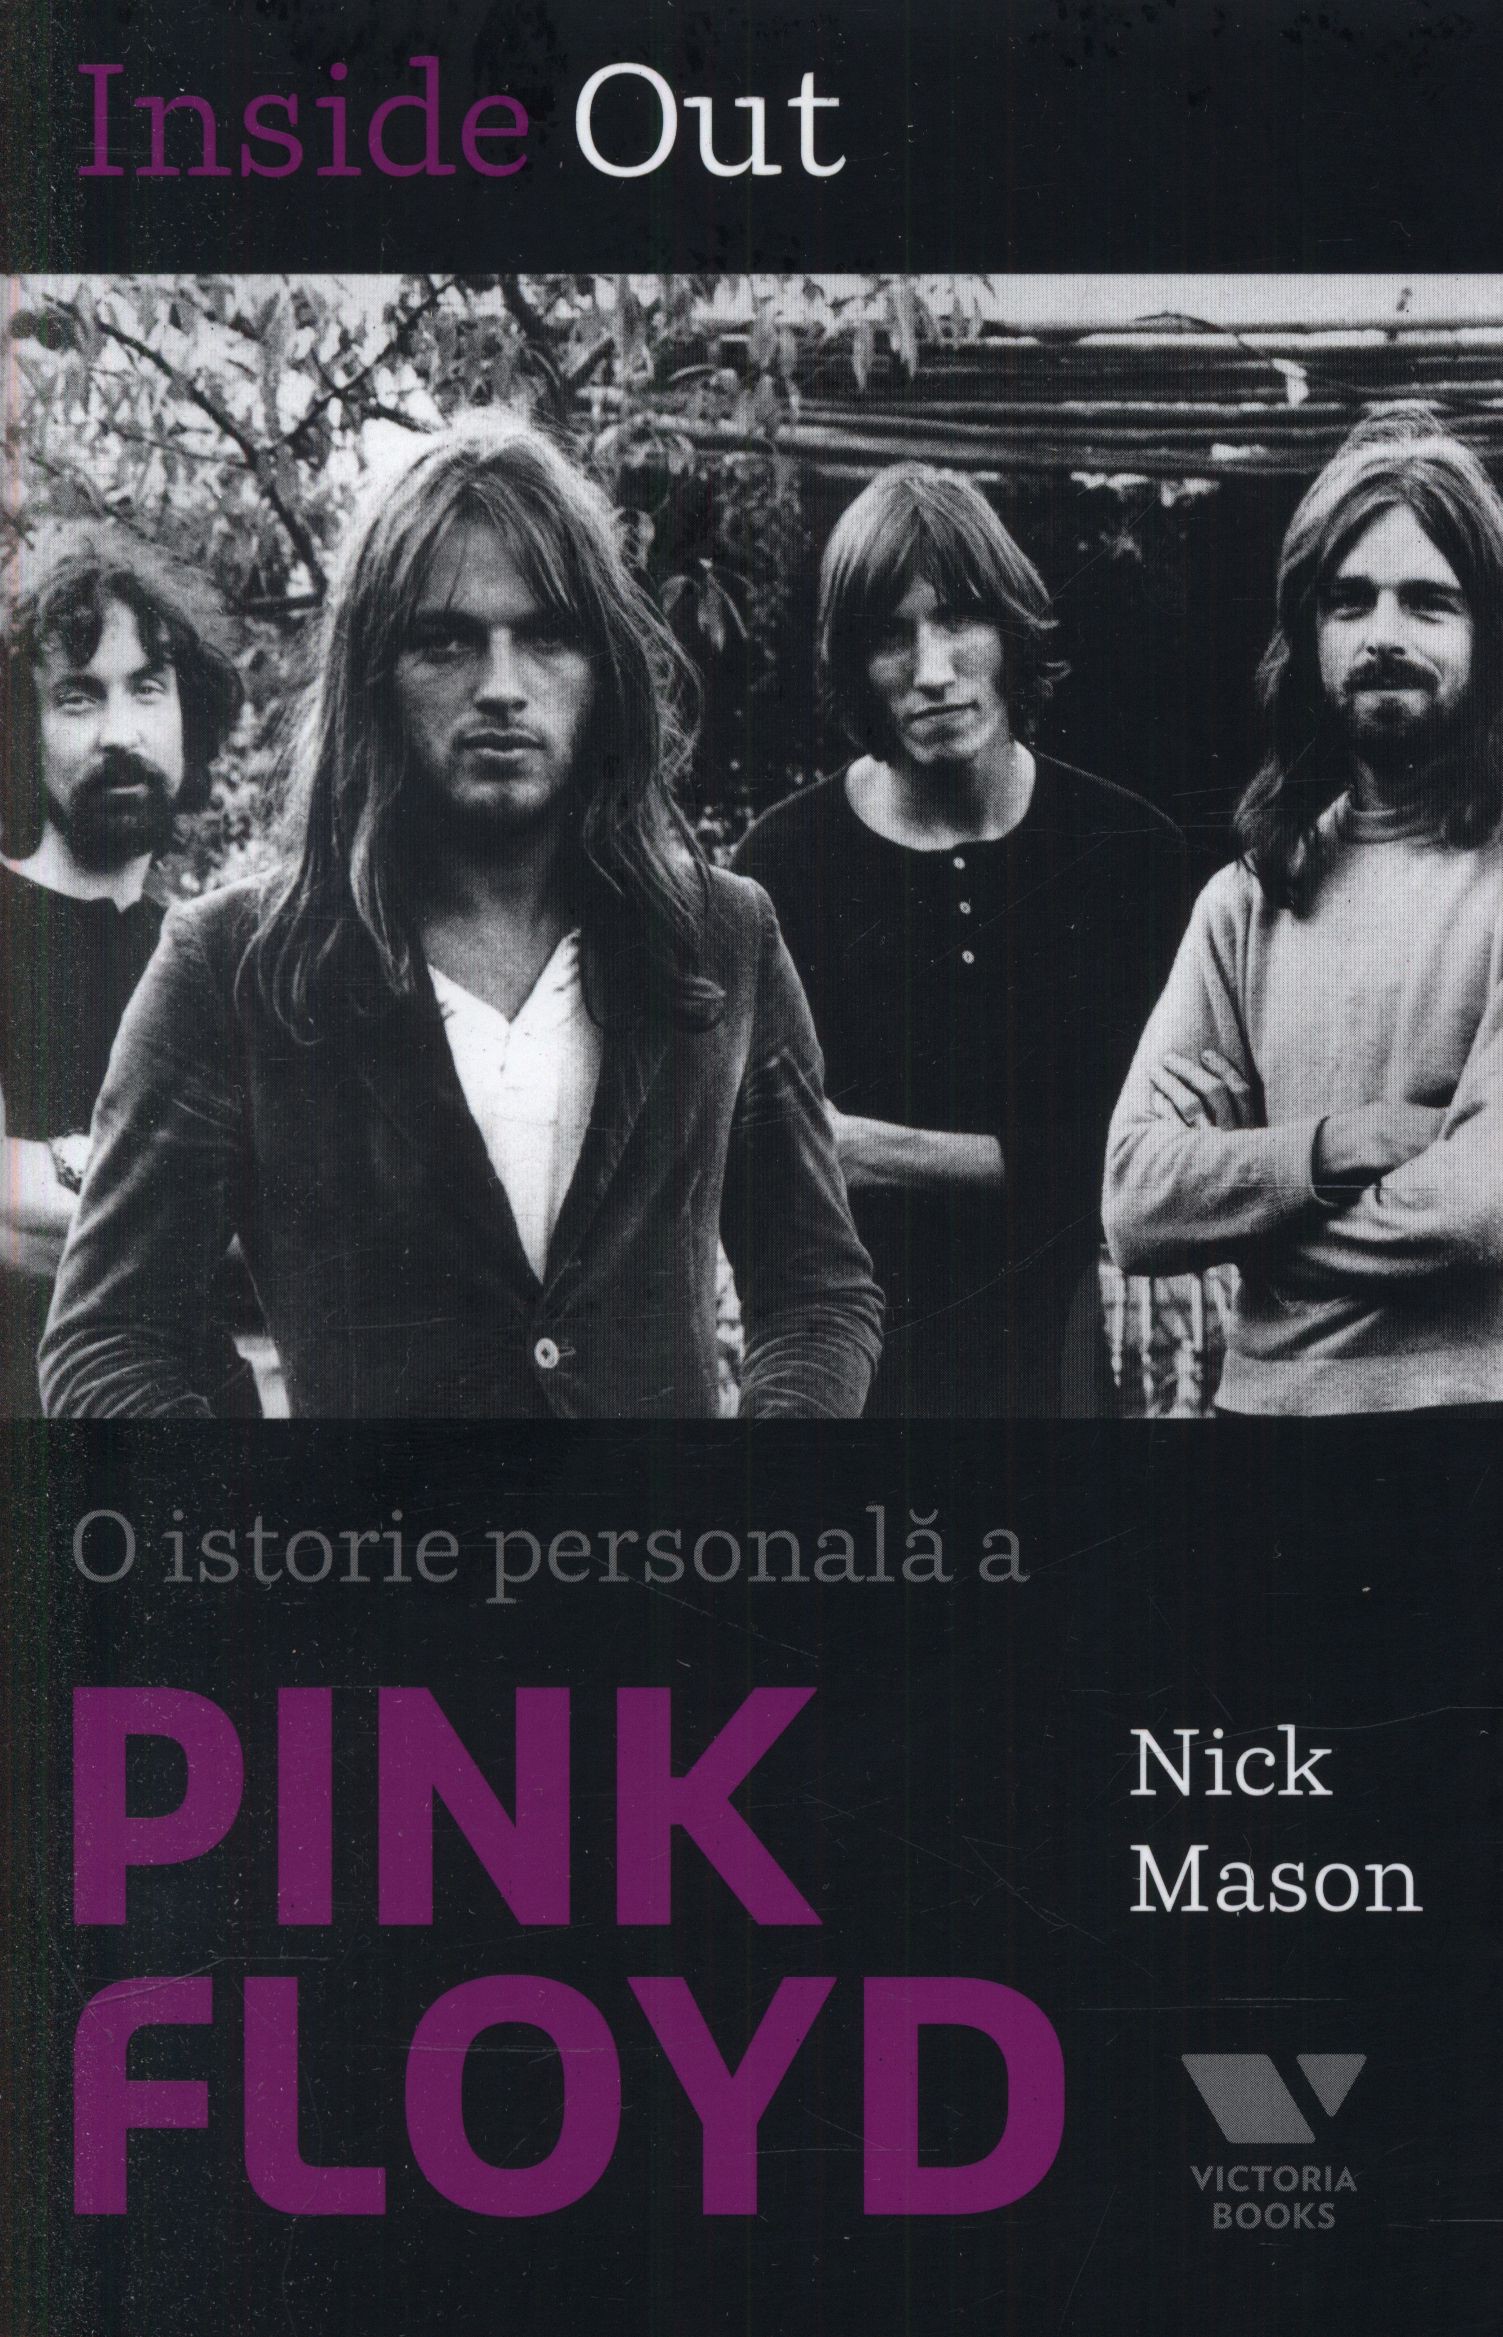 Inside Out. O istorie personală a Pink Floyd